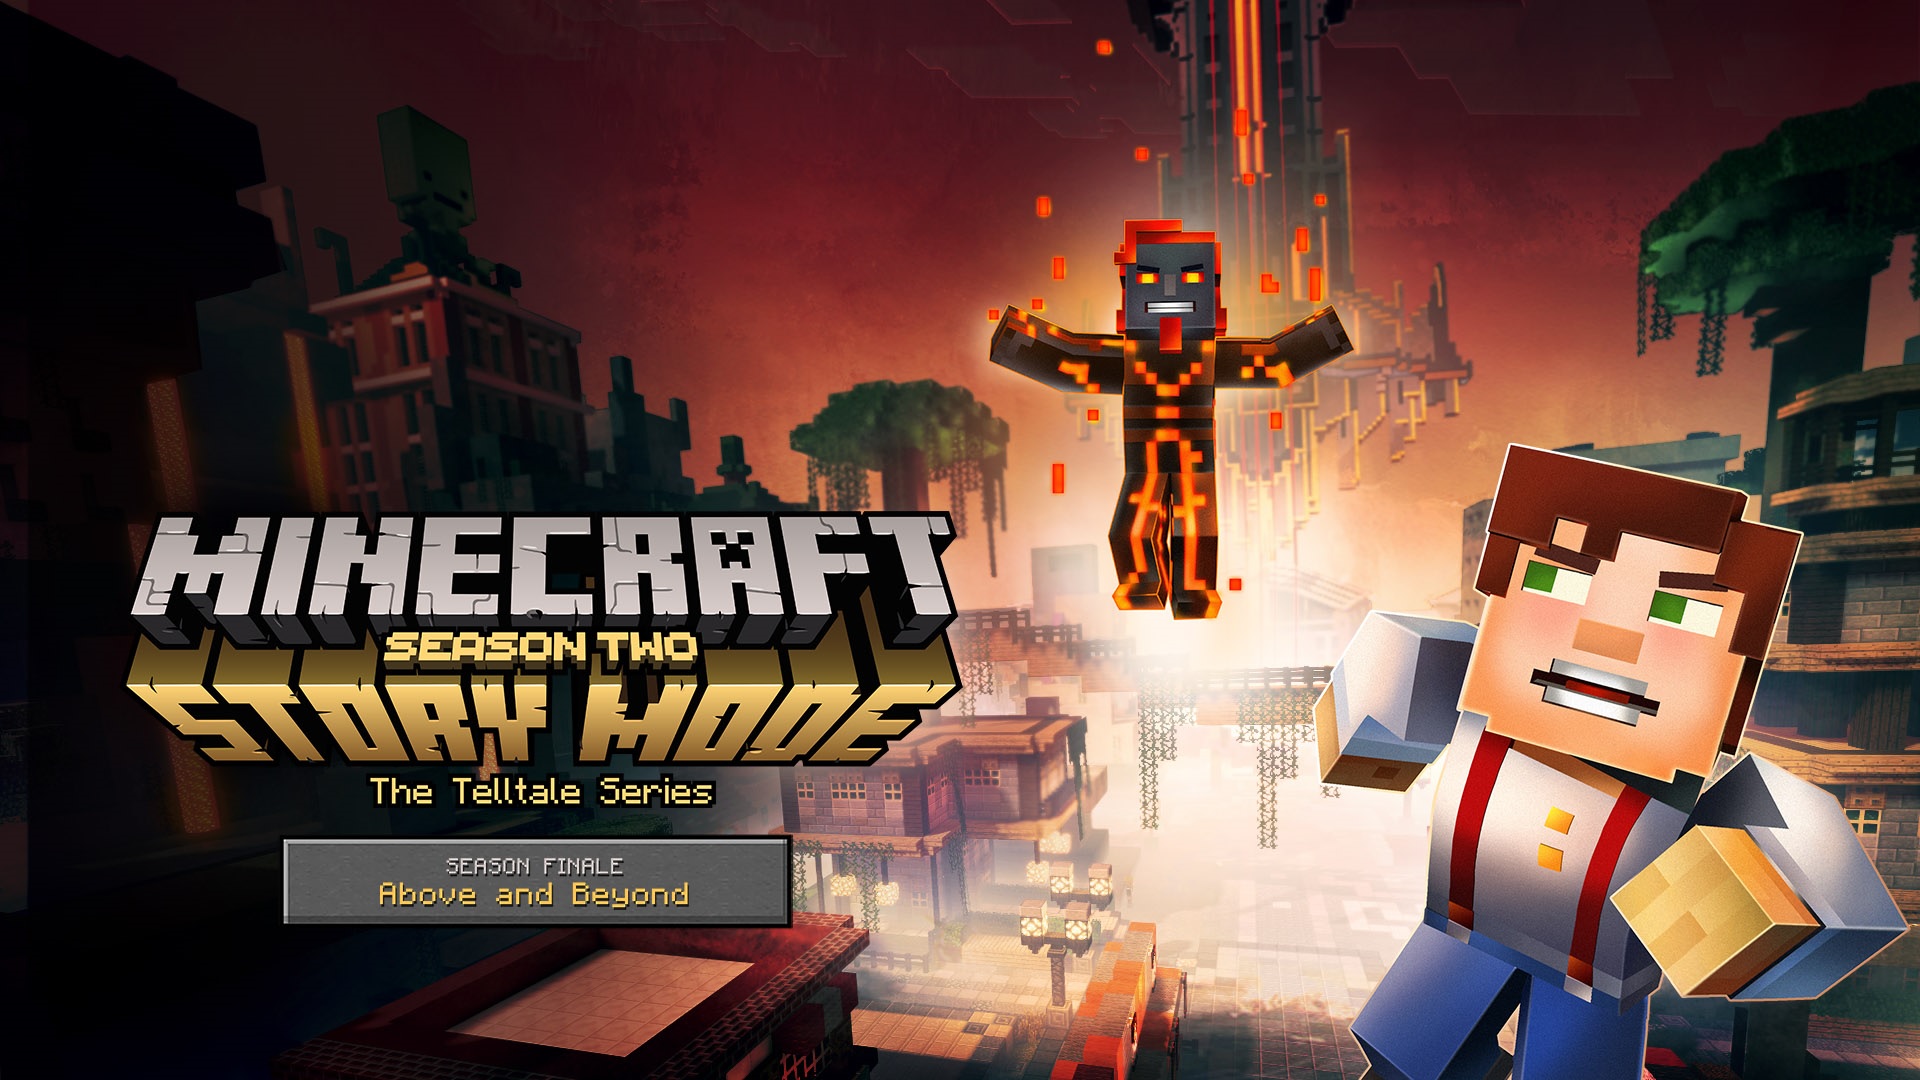 download minecraft story mode for pc free full version